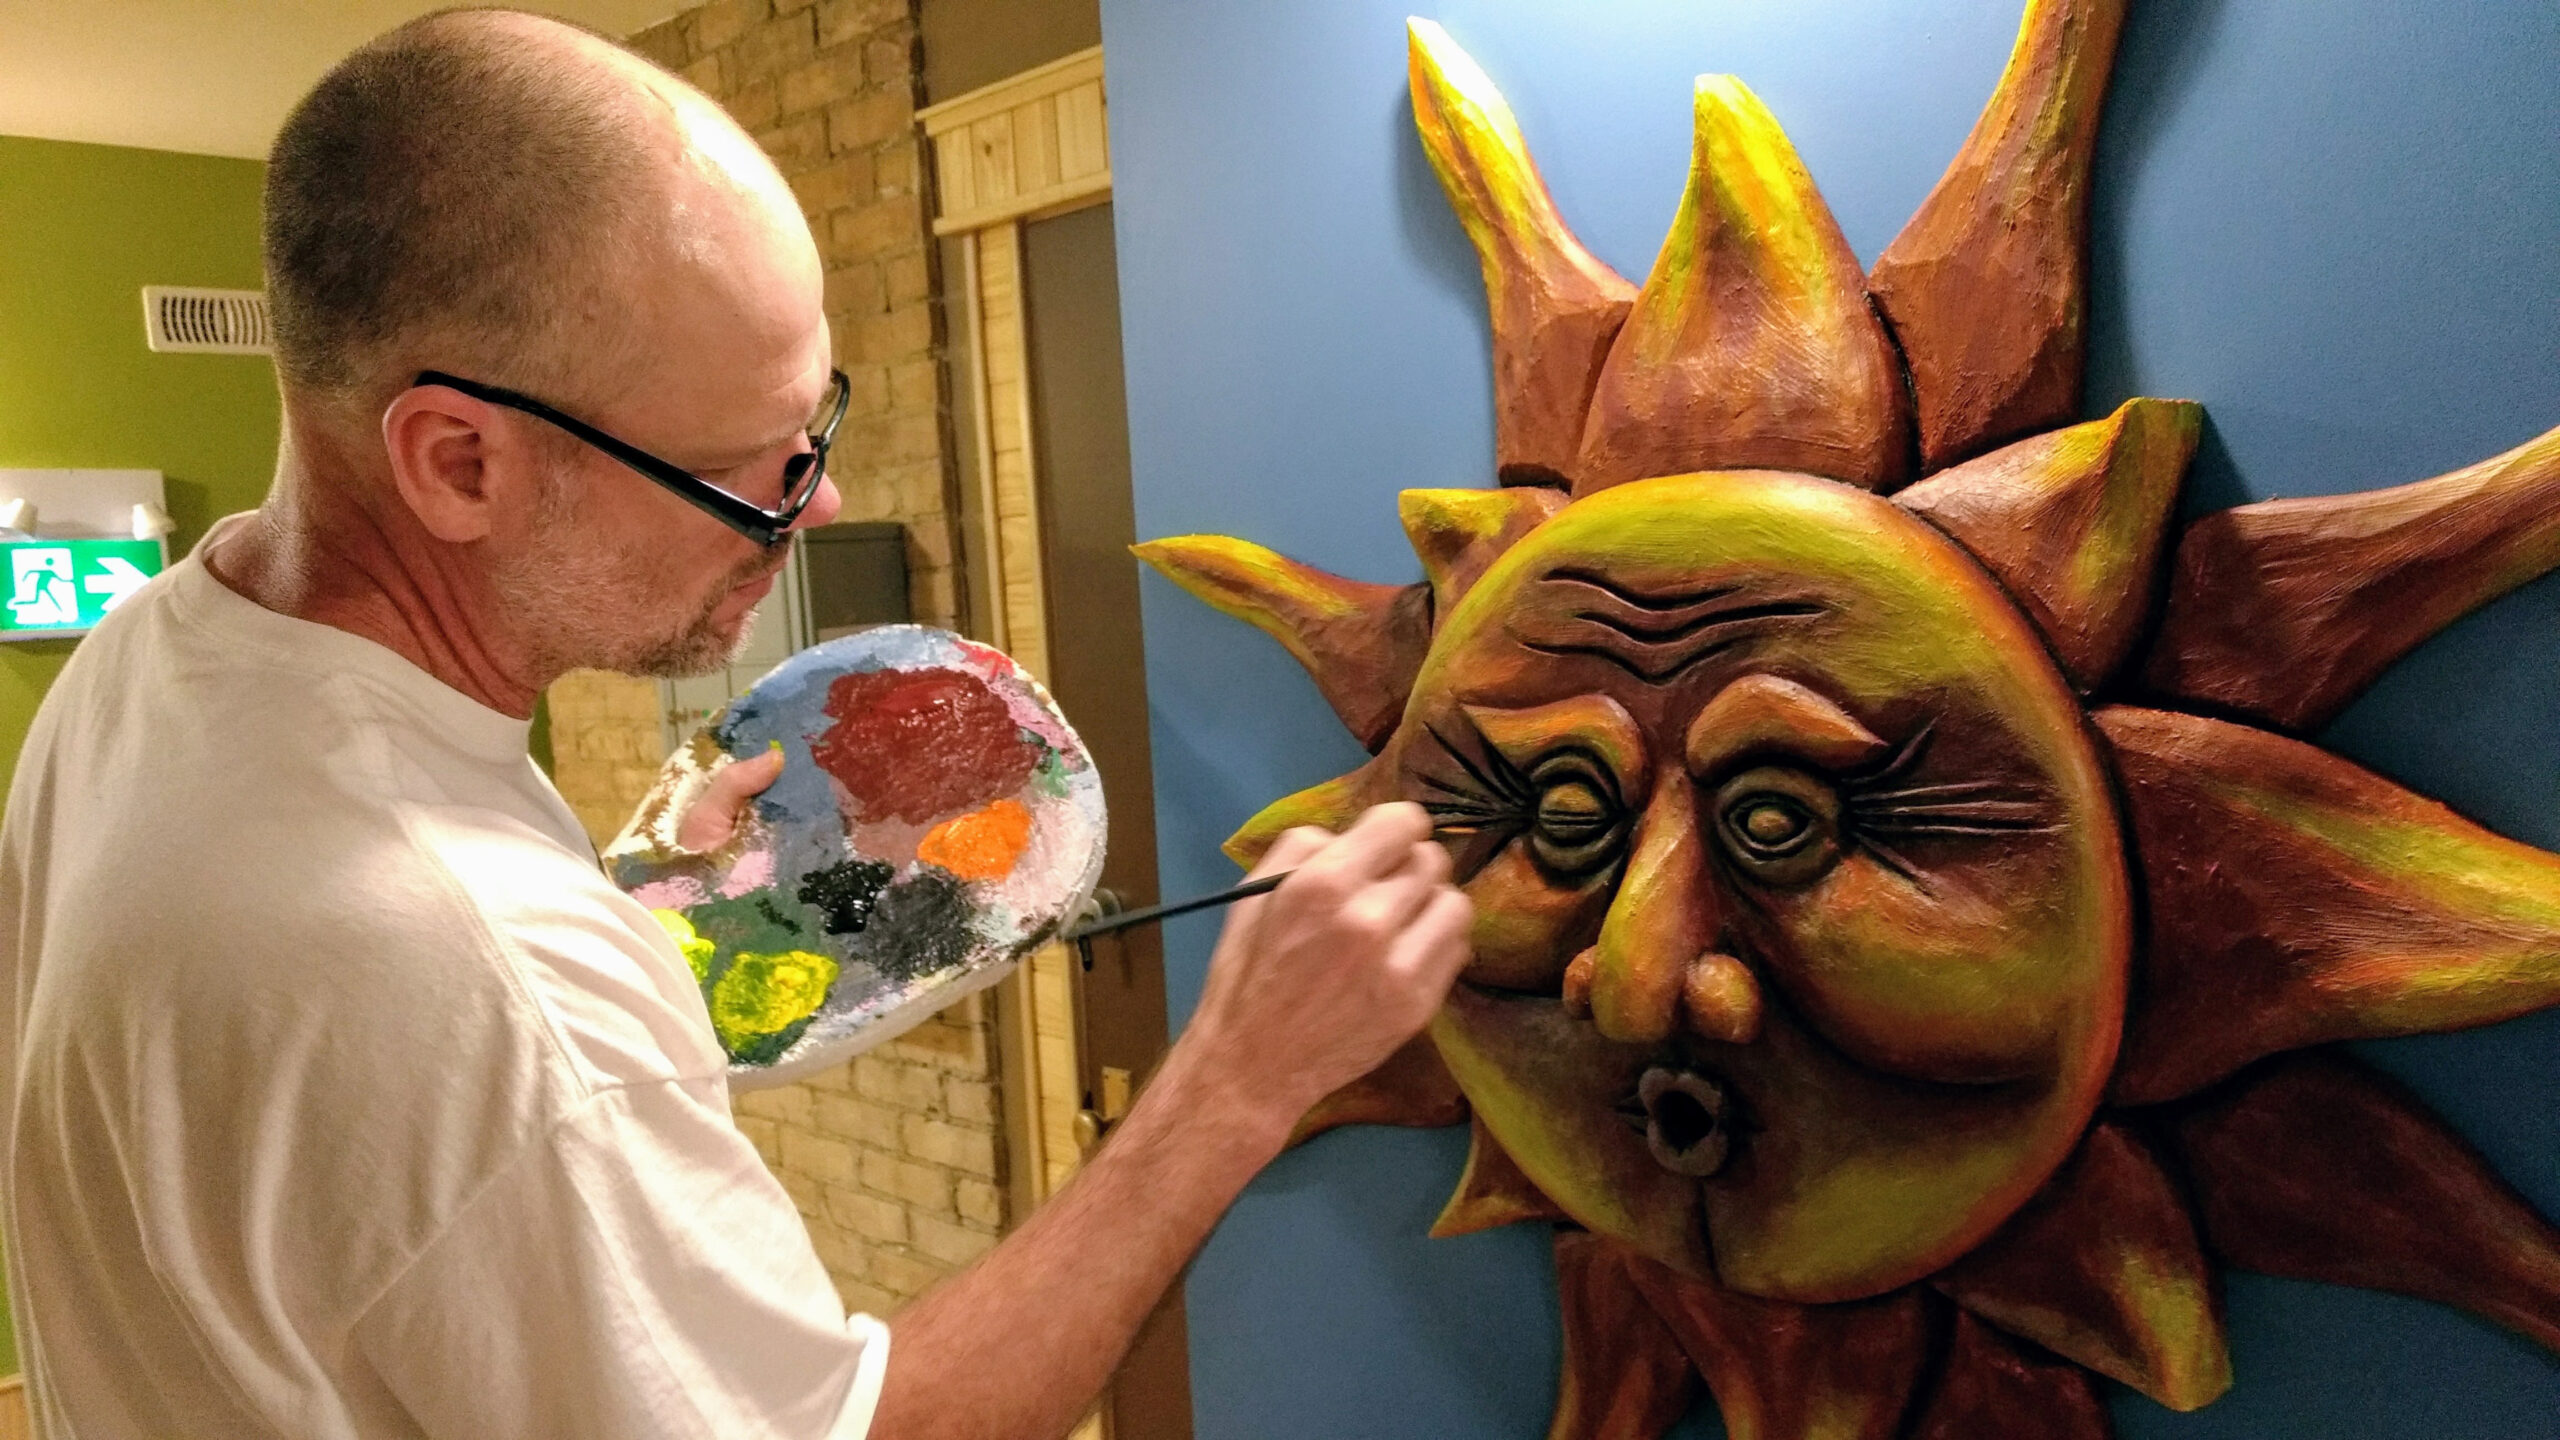 tony hale paints a large sun sculpture on the wall